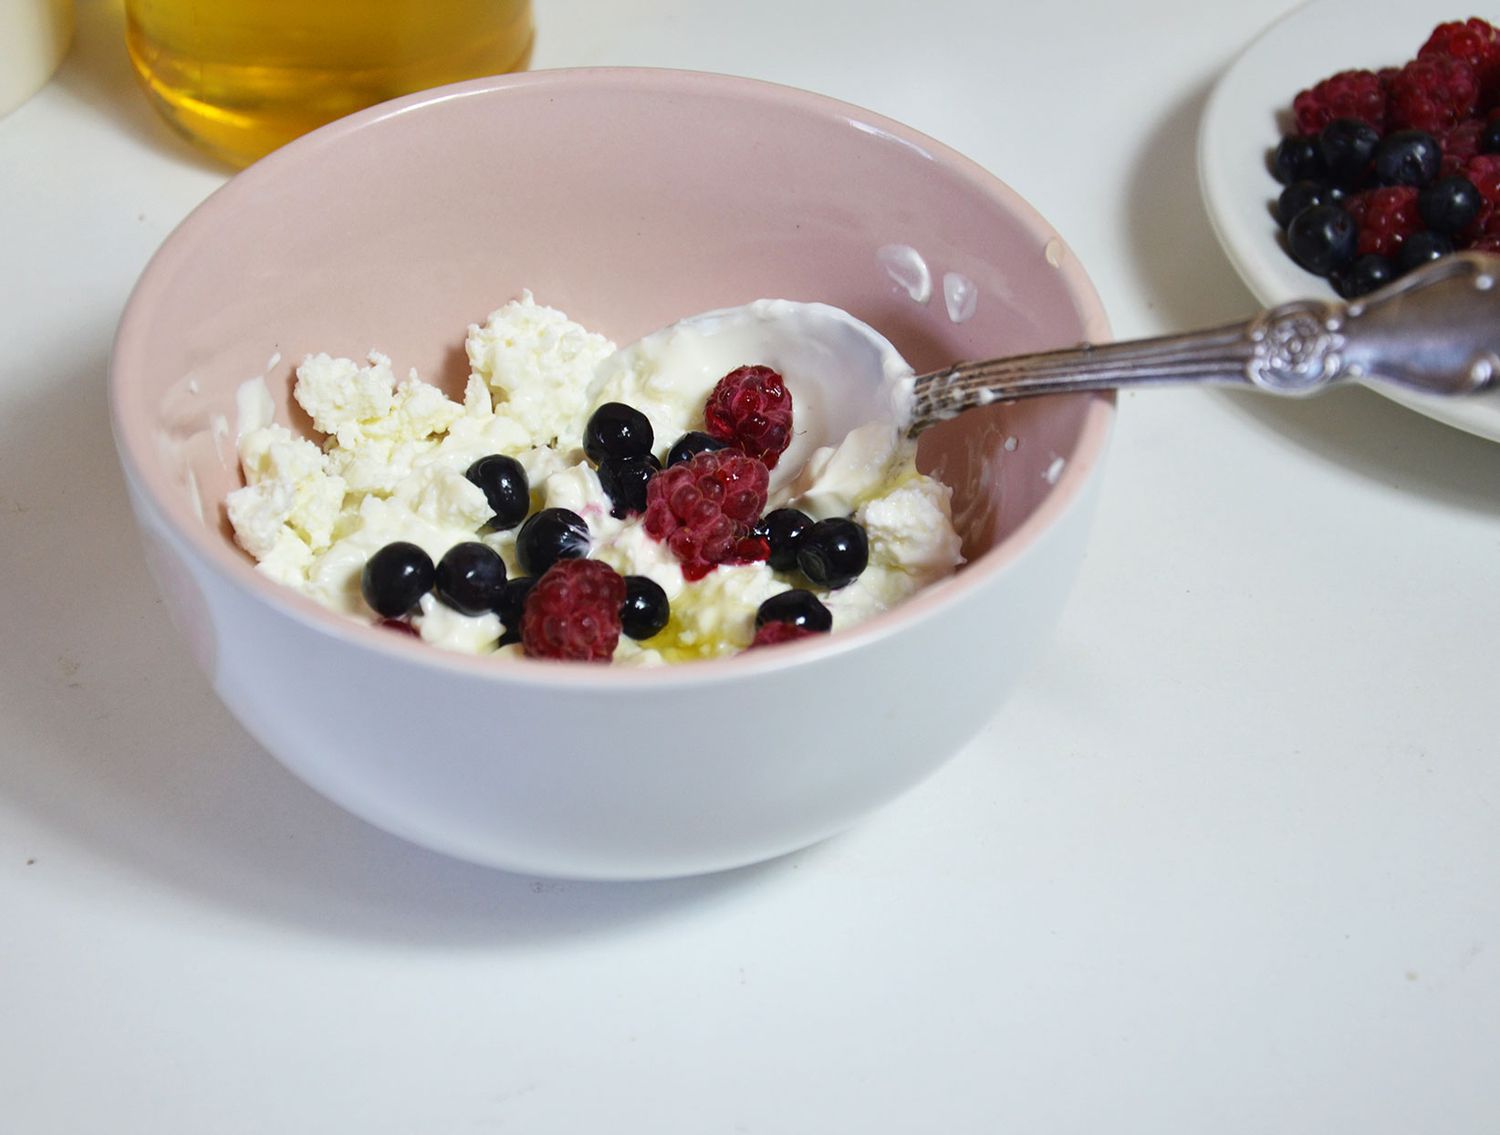 ricotta-snack-7-day-meal-plan-weight-loss